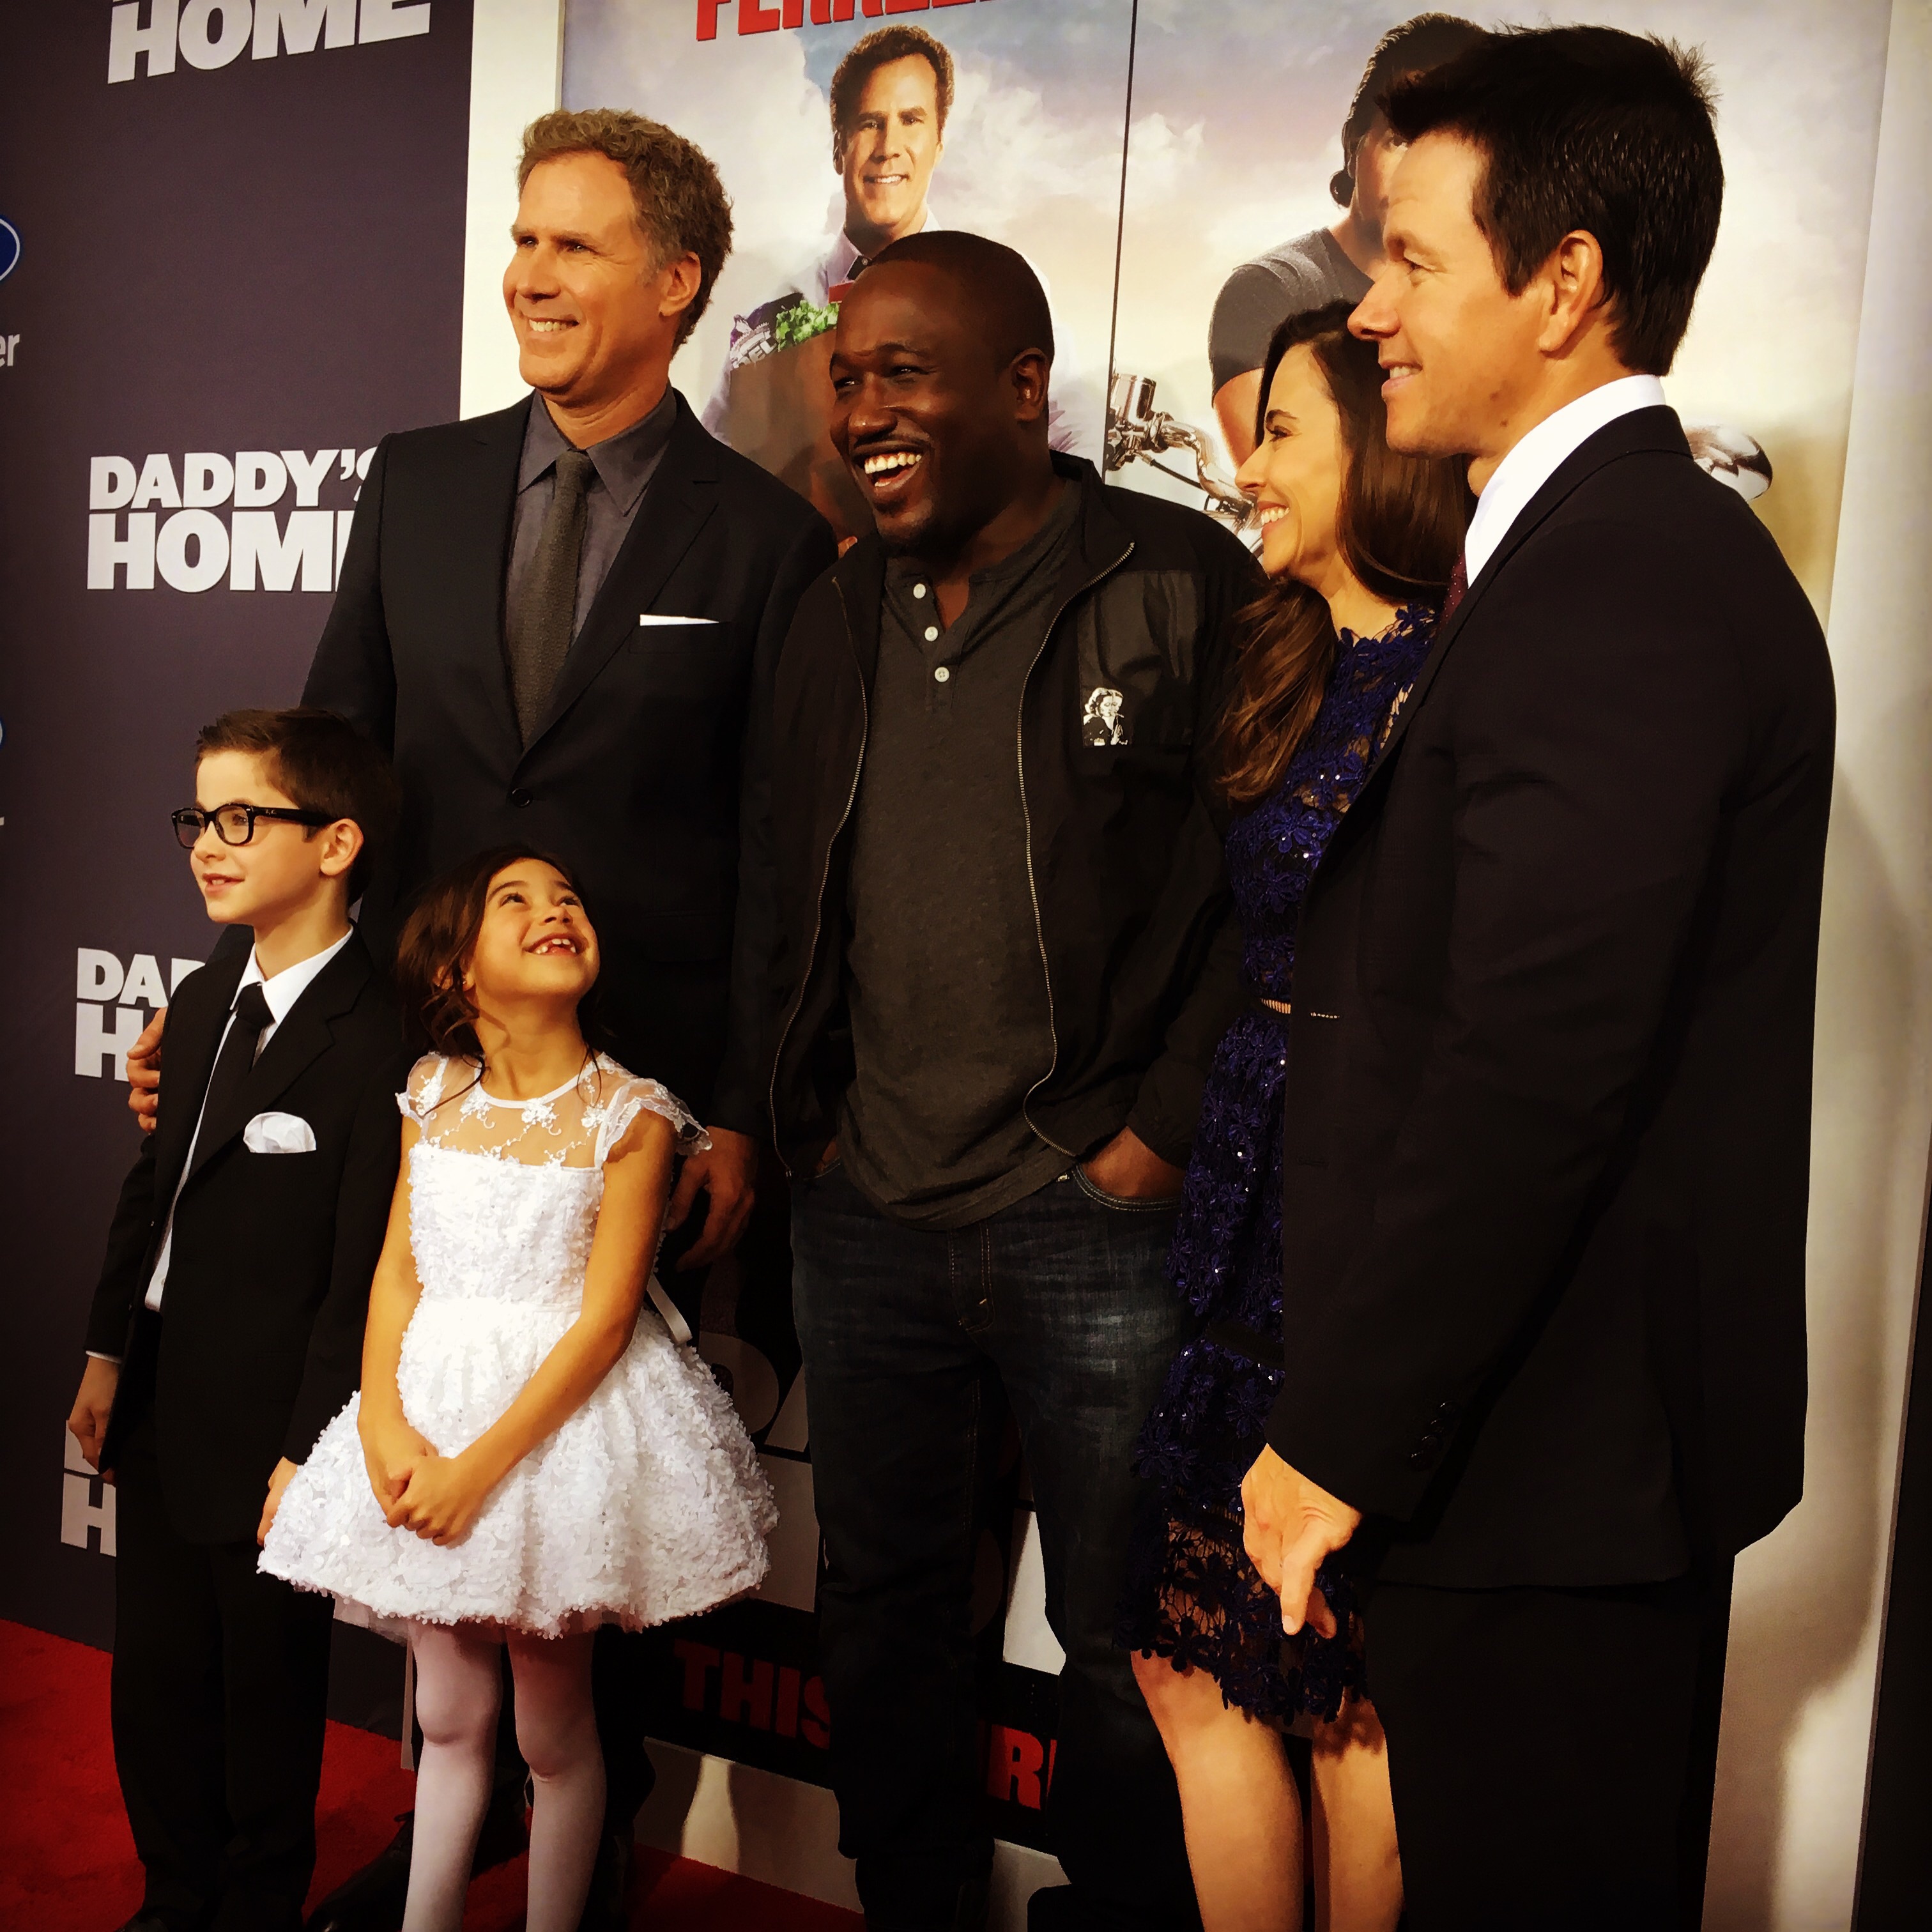 Daddy's Home premiere